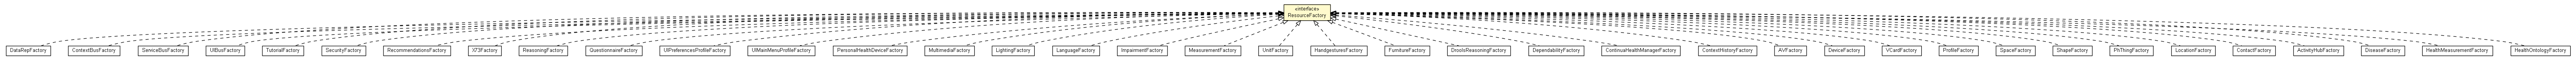 Package class diagram package ResourceFactory